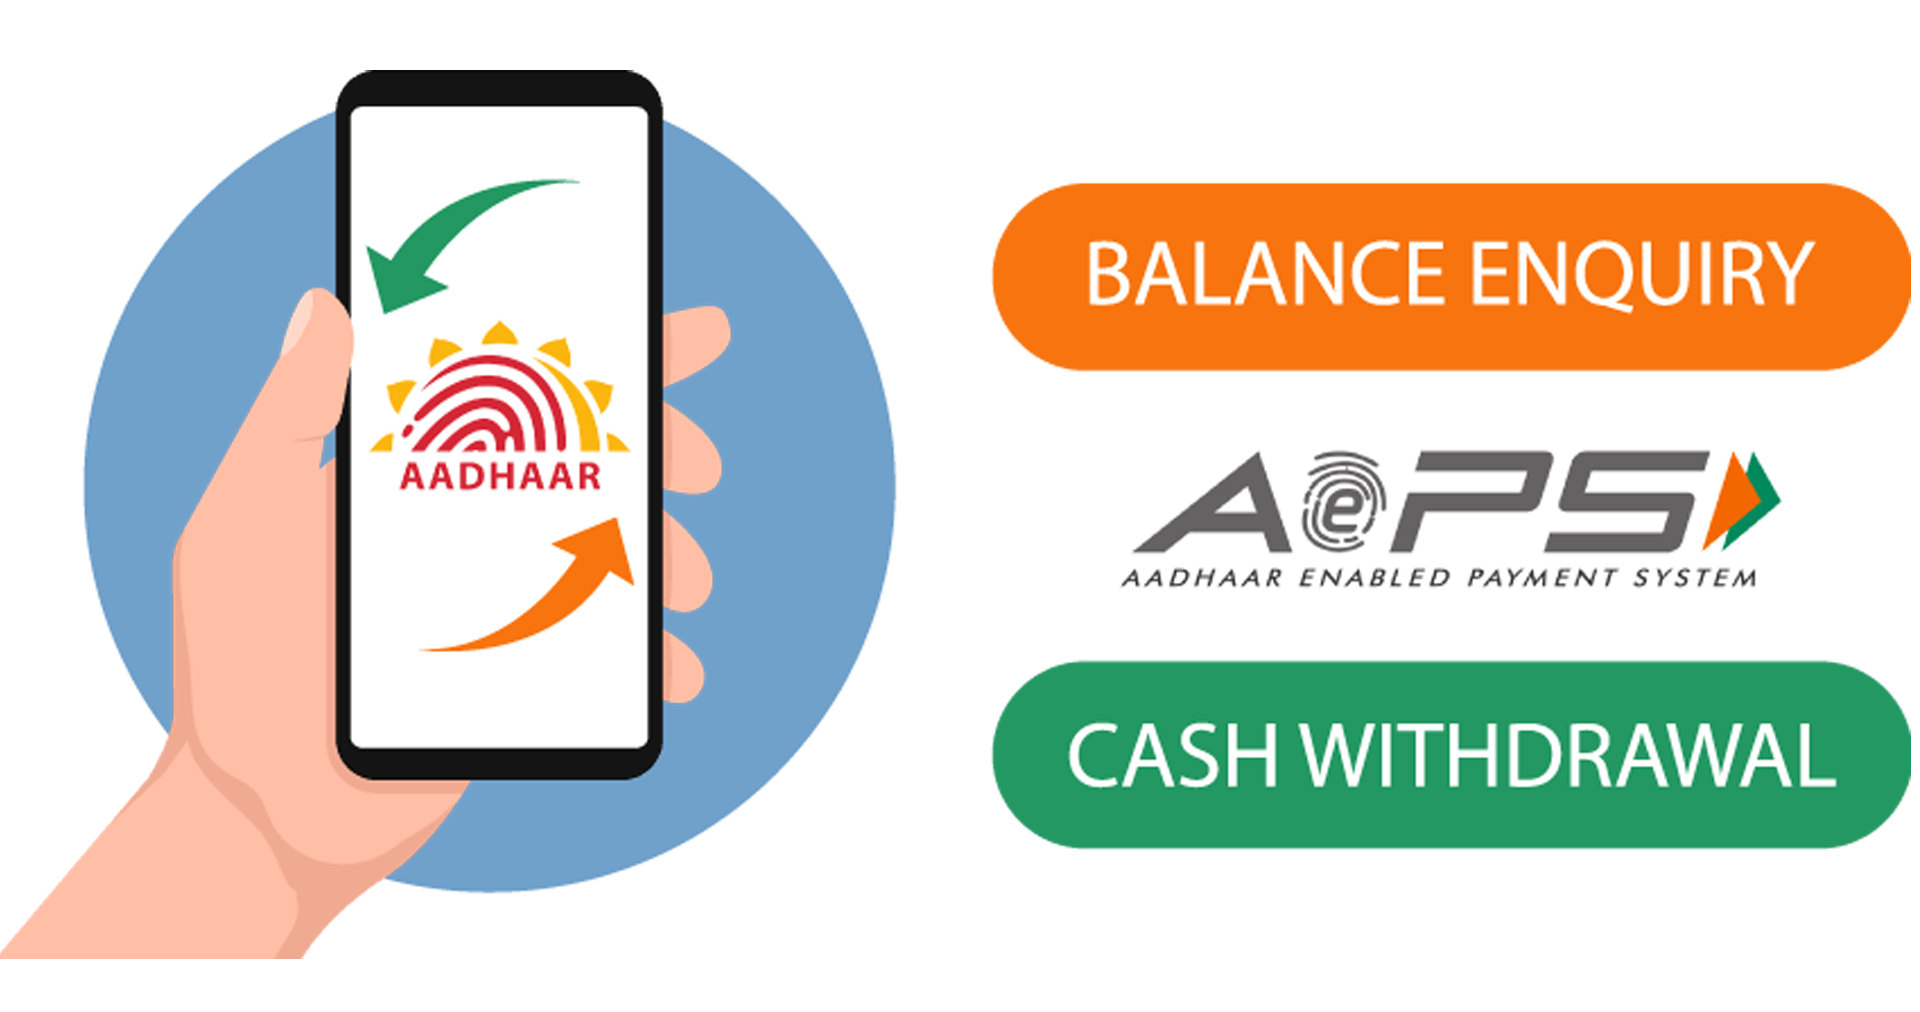 AePS Aadhaar Enabled Payment System Application | Money Transfer, Cash  Withdrawal Banking Portal Provider Company | Eko India Financial Services |  The Leading Fintech Company in India